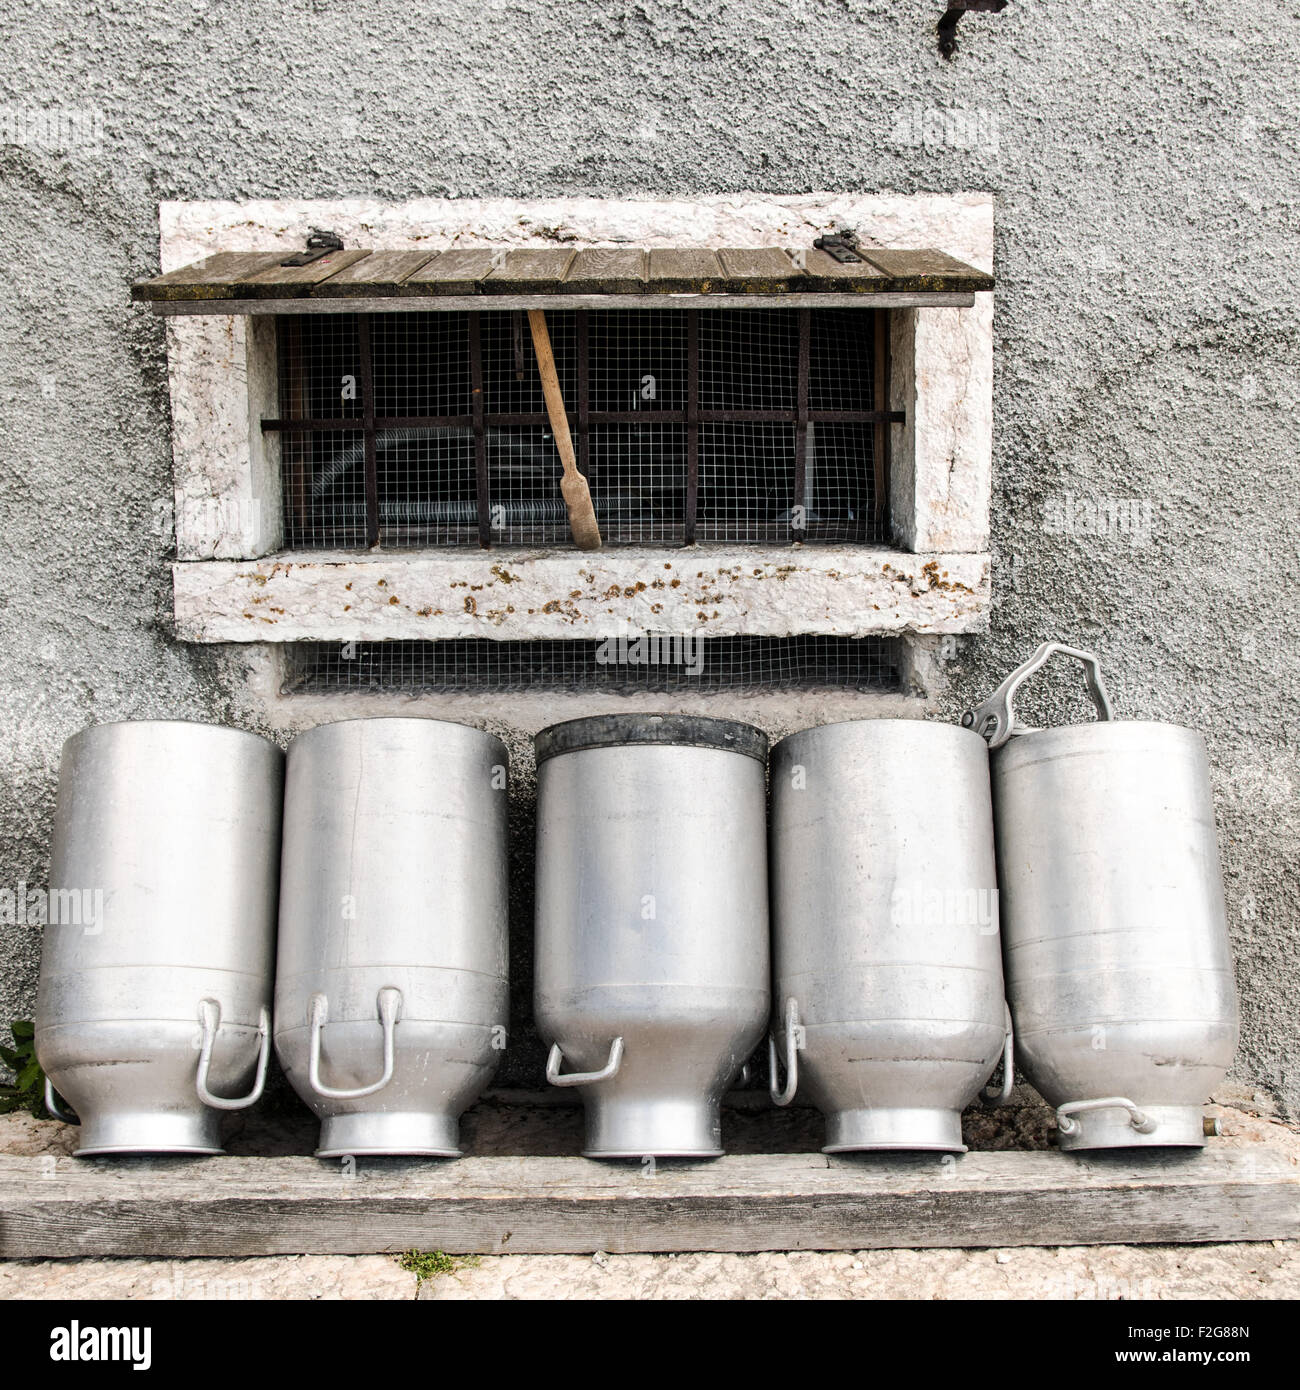 Vintage milk cans in rural Northern Italy. Stock Photo